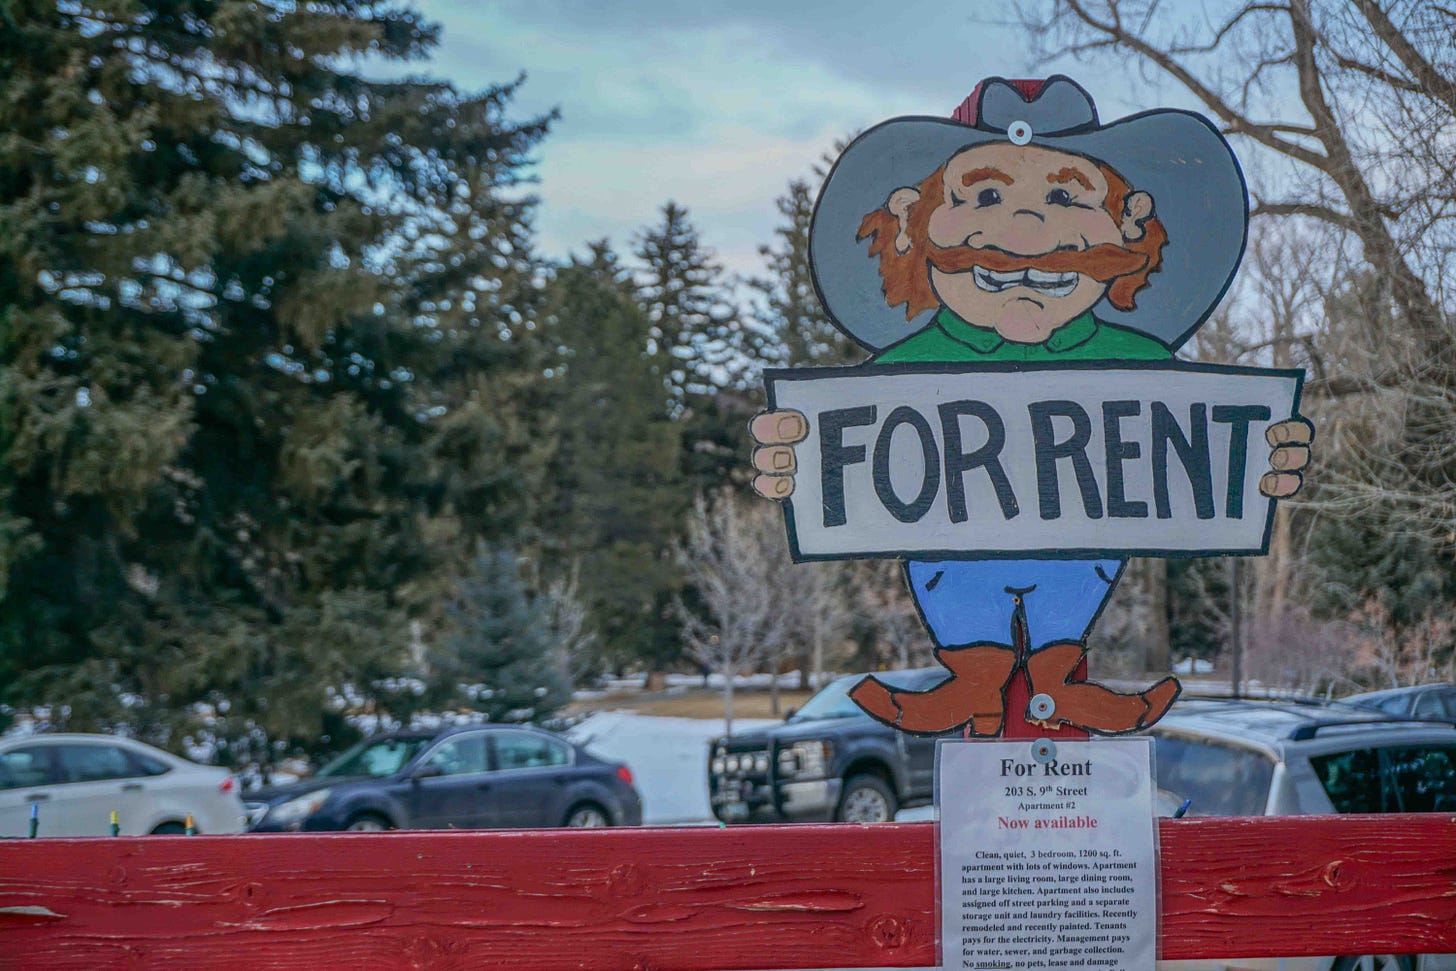 A cartoon cowboy holds a "For rent" sign on a display nailed to a red fence. Campus trees are visible in the background.